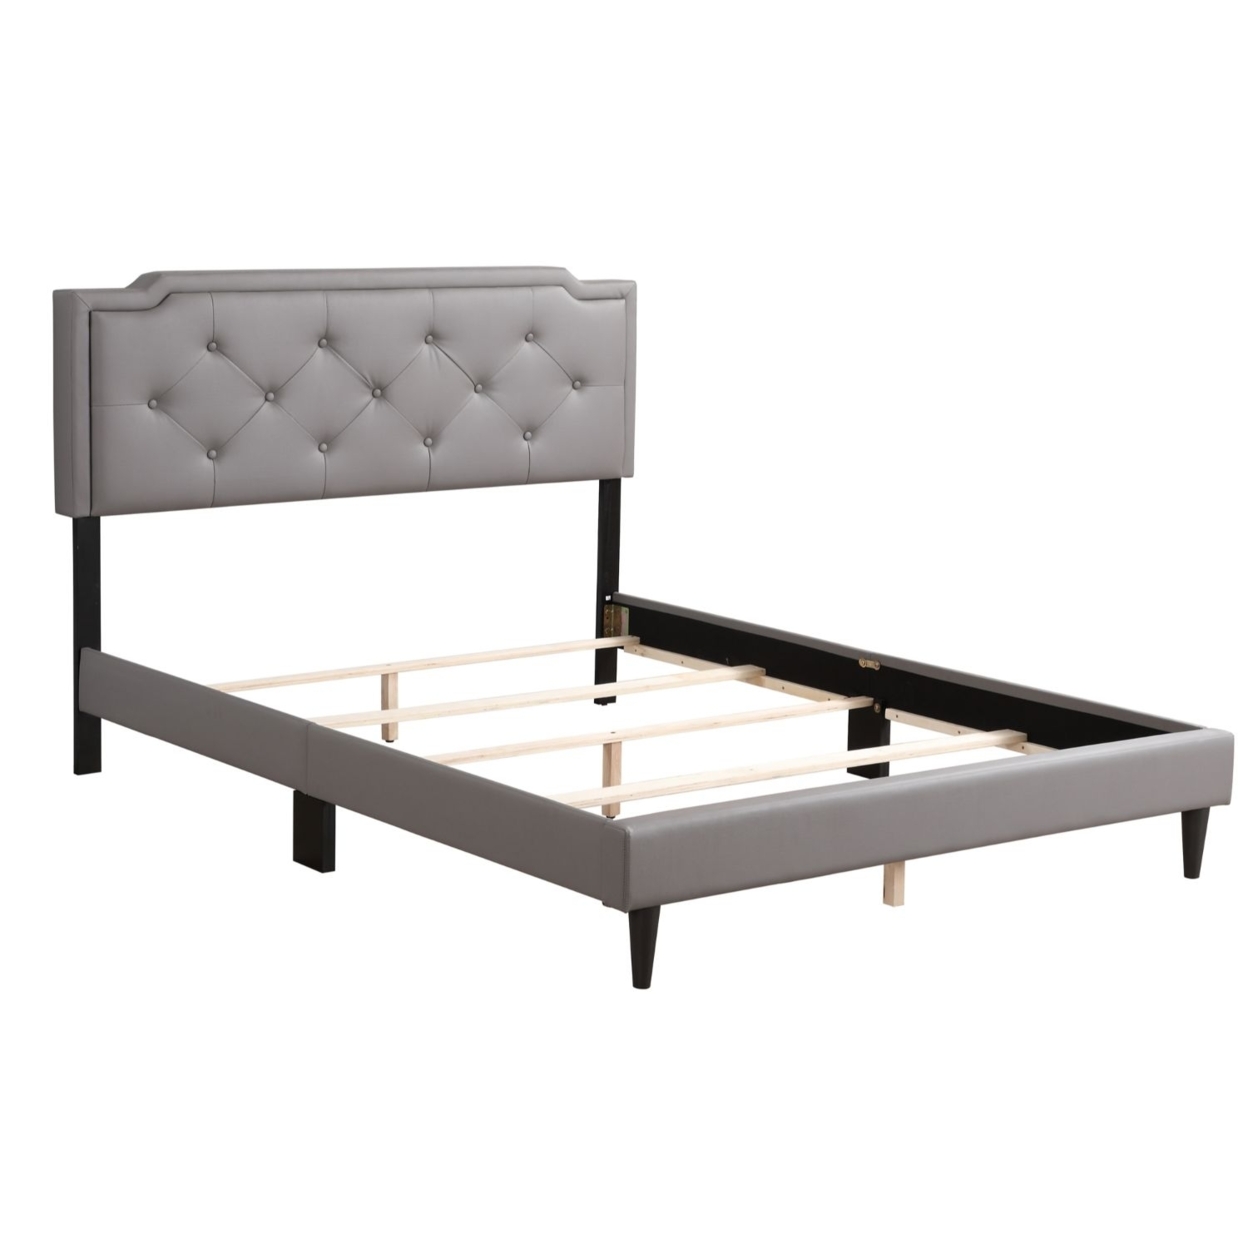 Home Furnitue Deb Light Grey Full Adjustable Panel Bed - image 3 of 5